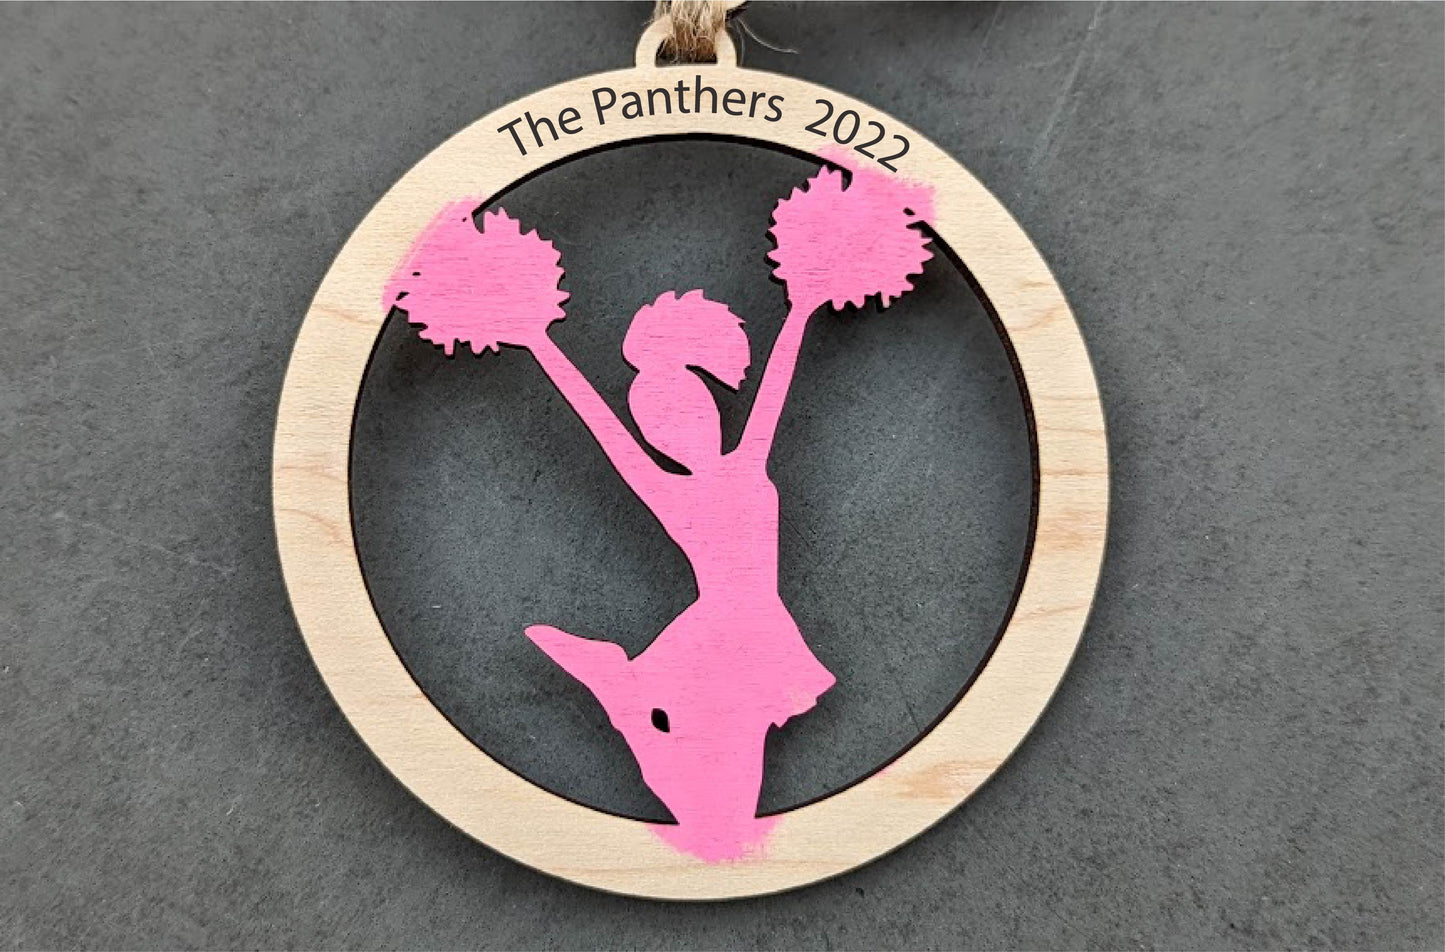 Cheer svg - Gift for Cheerleading Coach - Ornament or Car charm svg - Can be customized with name or message - Glowforge tested Laser cut file